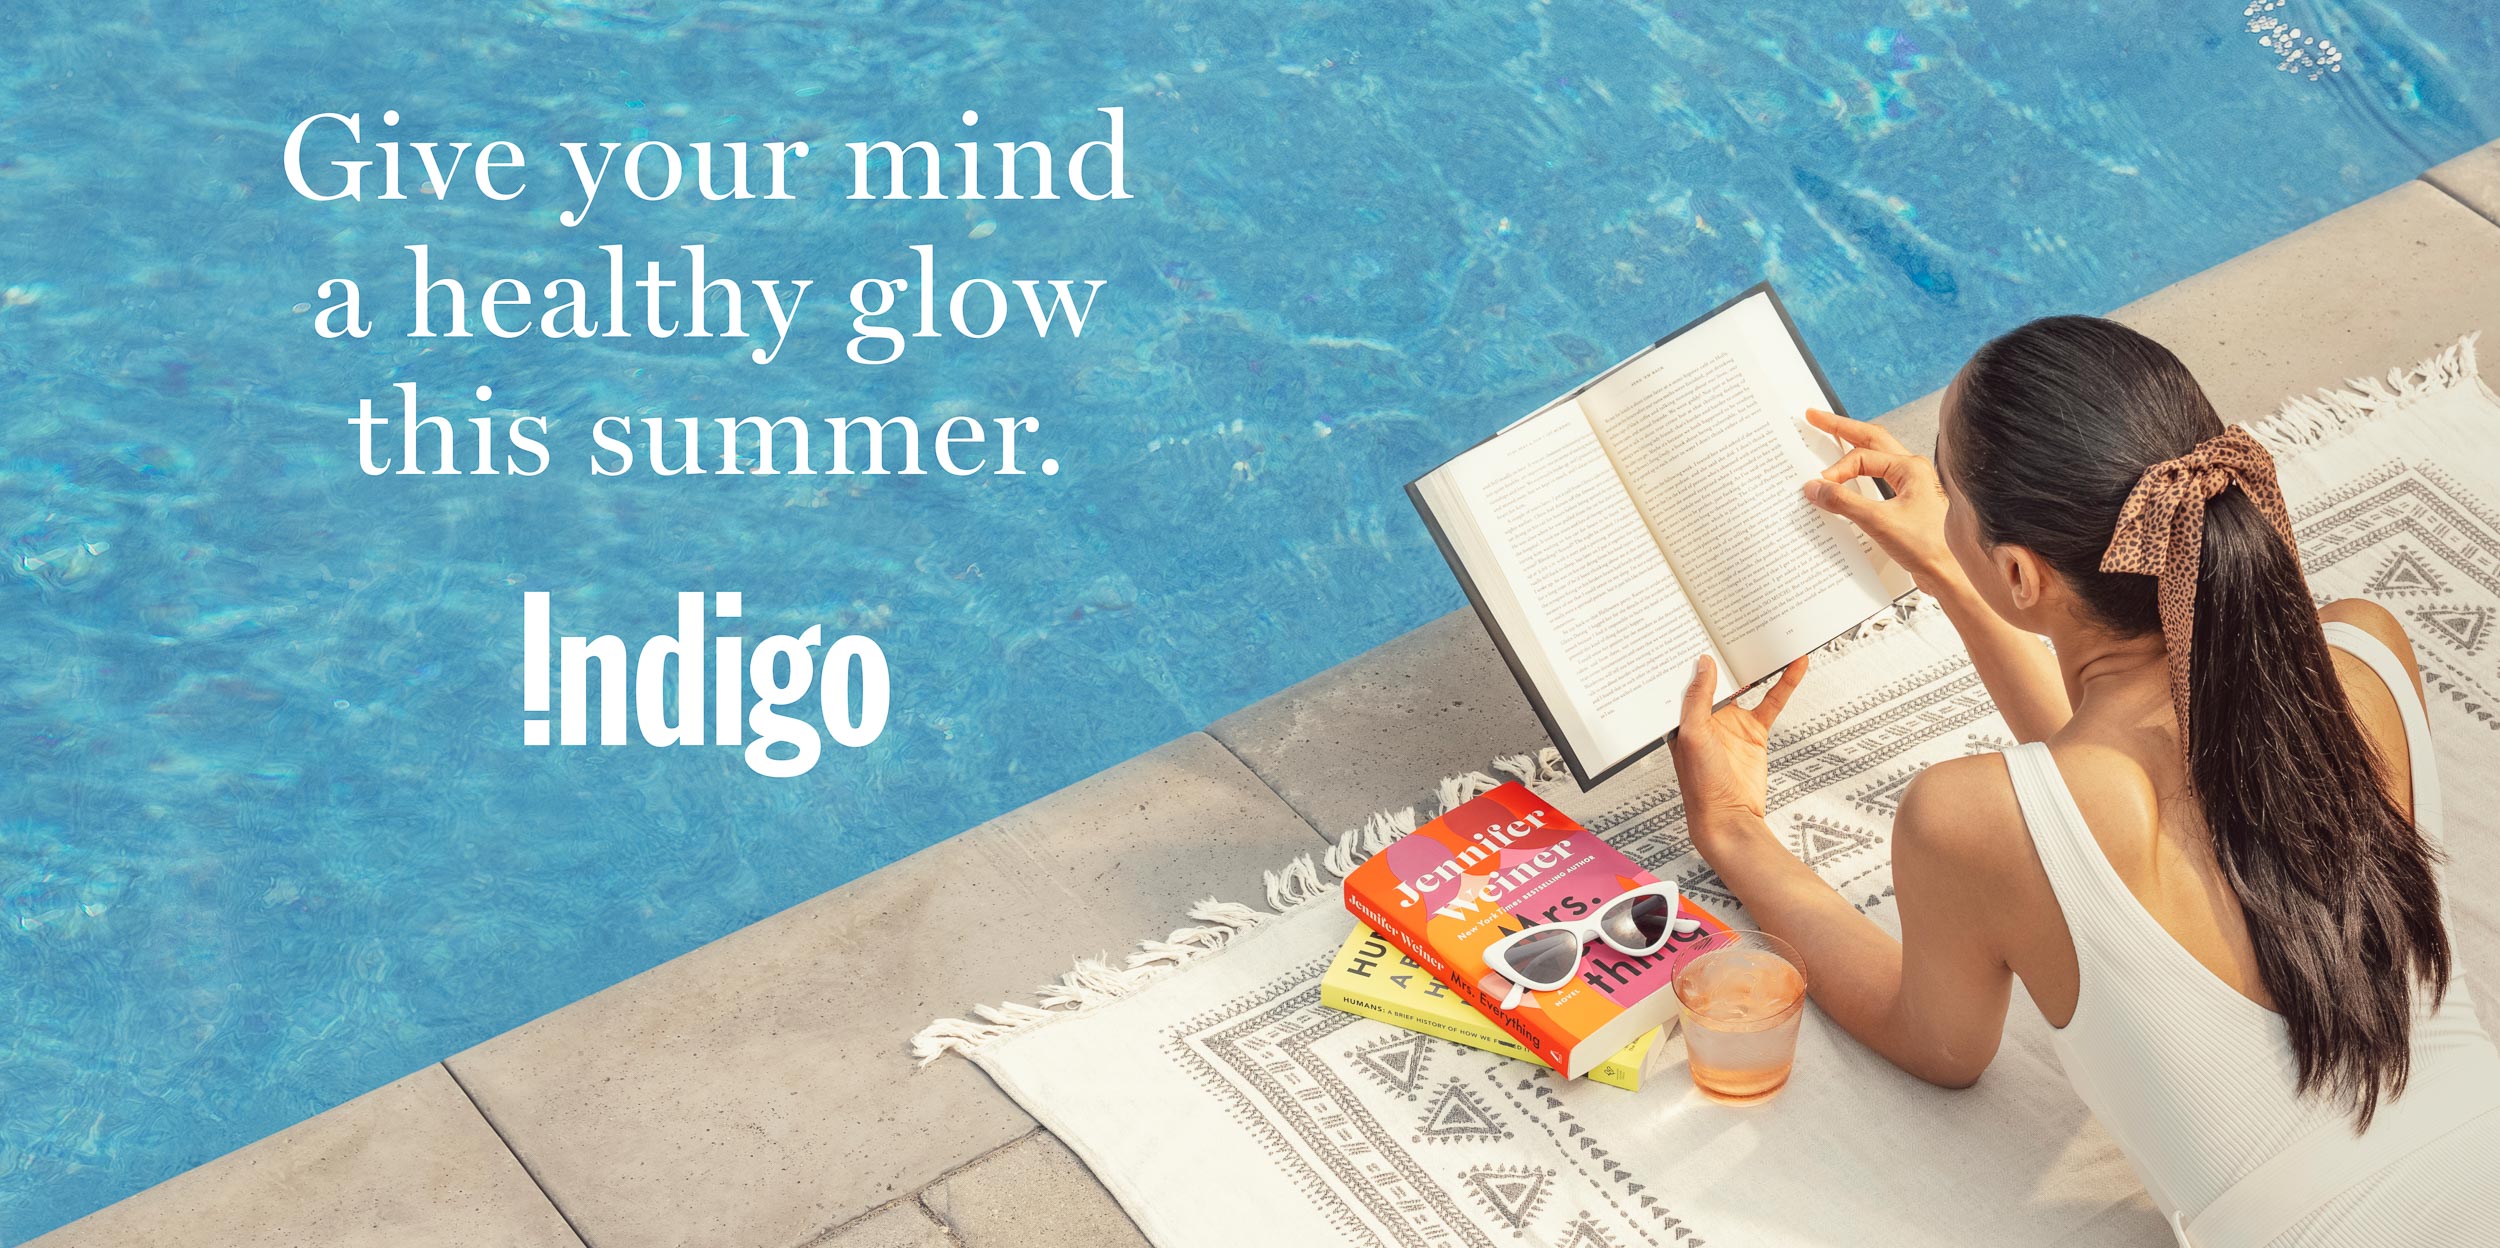 Advertising campaign for Indigo summer reading with Conflict Agency.